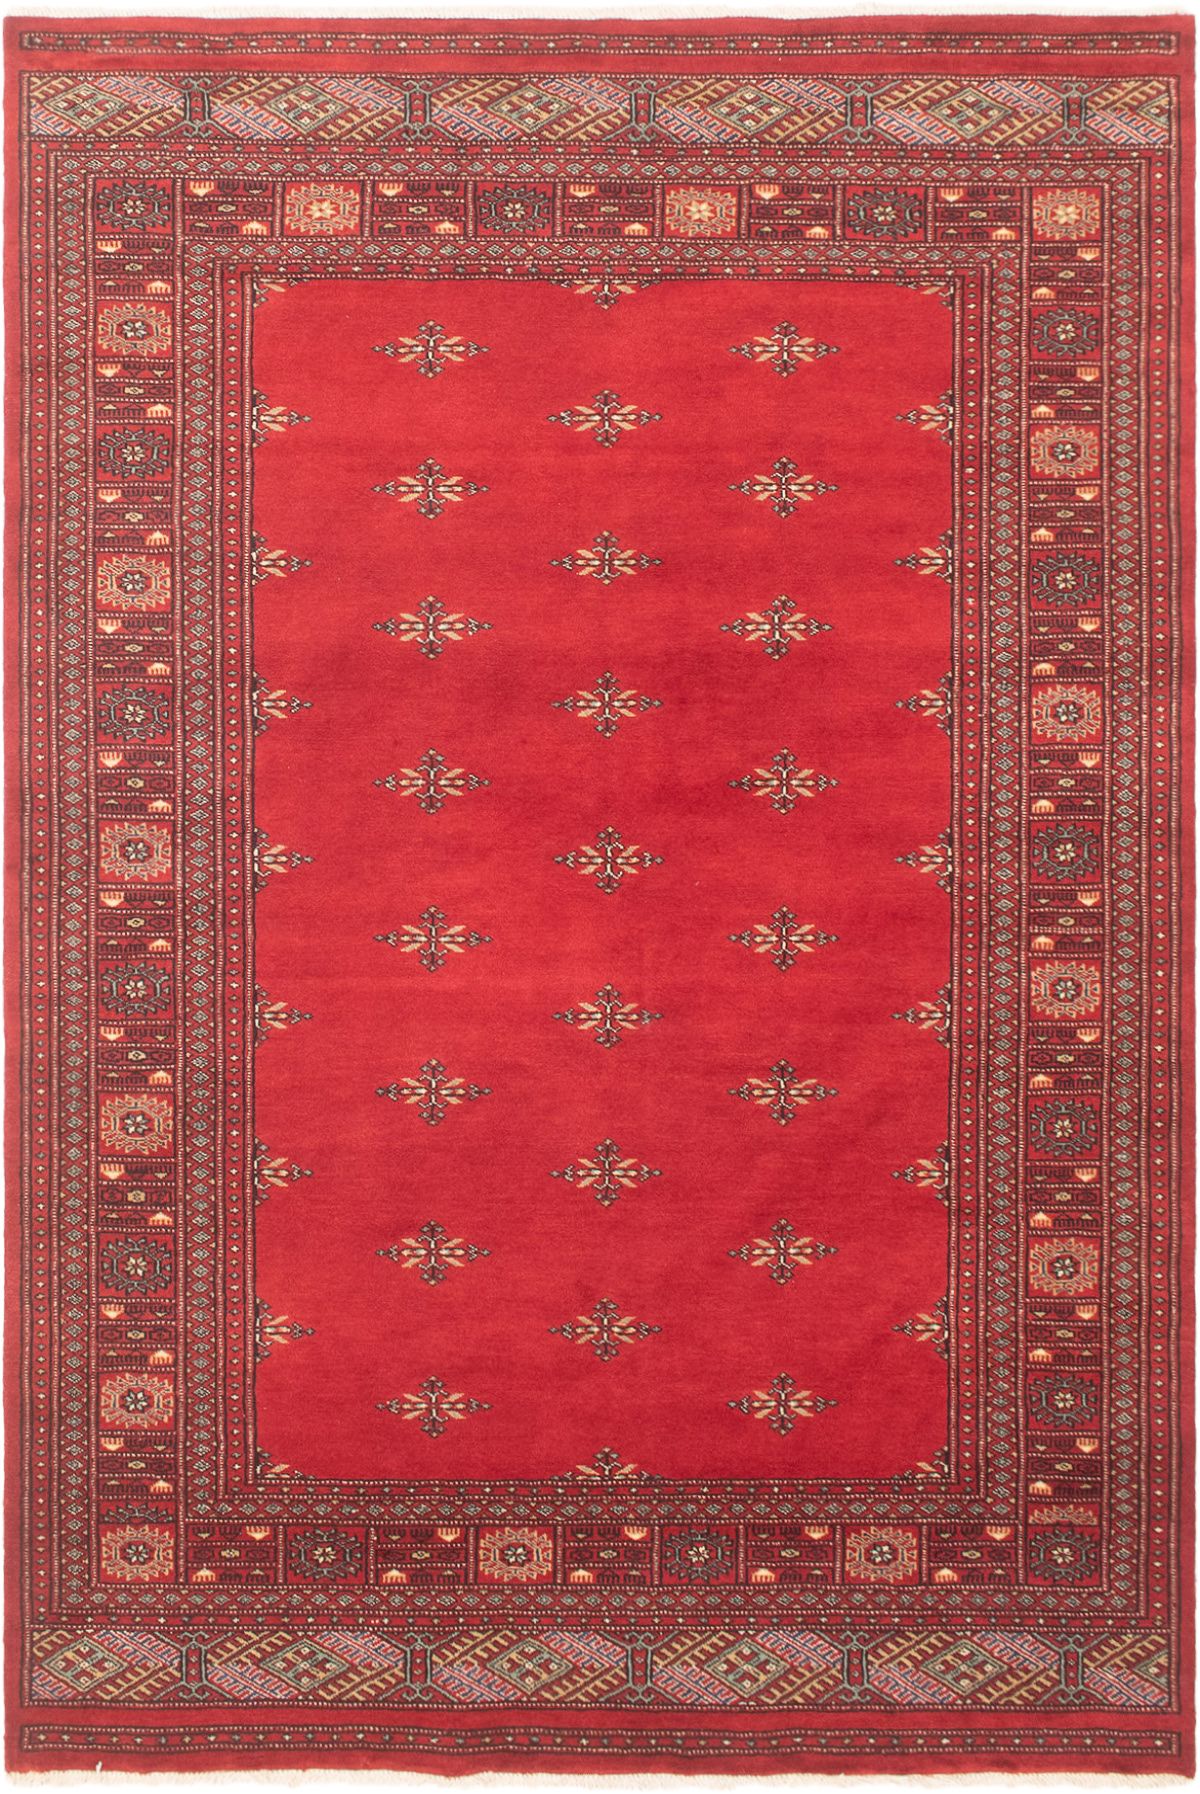 Hand-knotted Finest Peshawar Bokhara Red Wool Rug 5'4" x 9'1" Size: 5'4" x 9'1"  